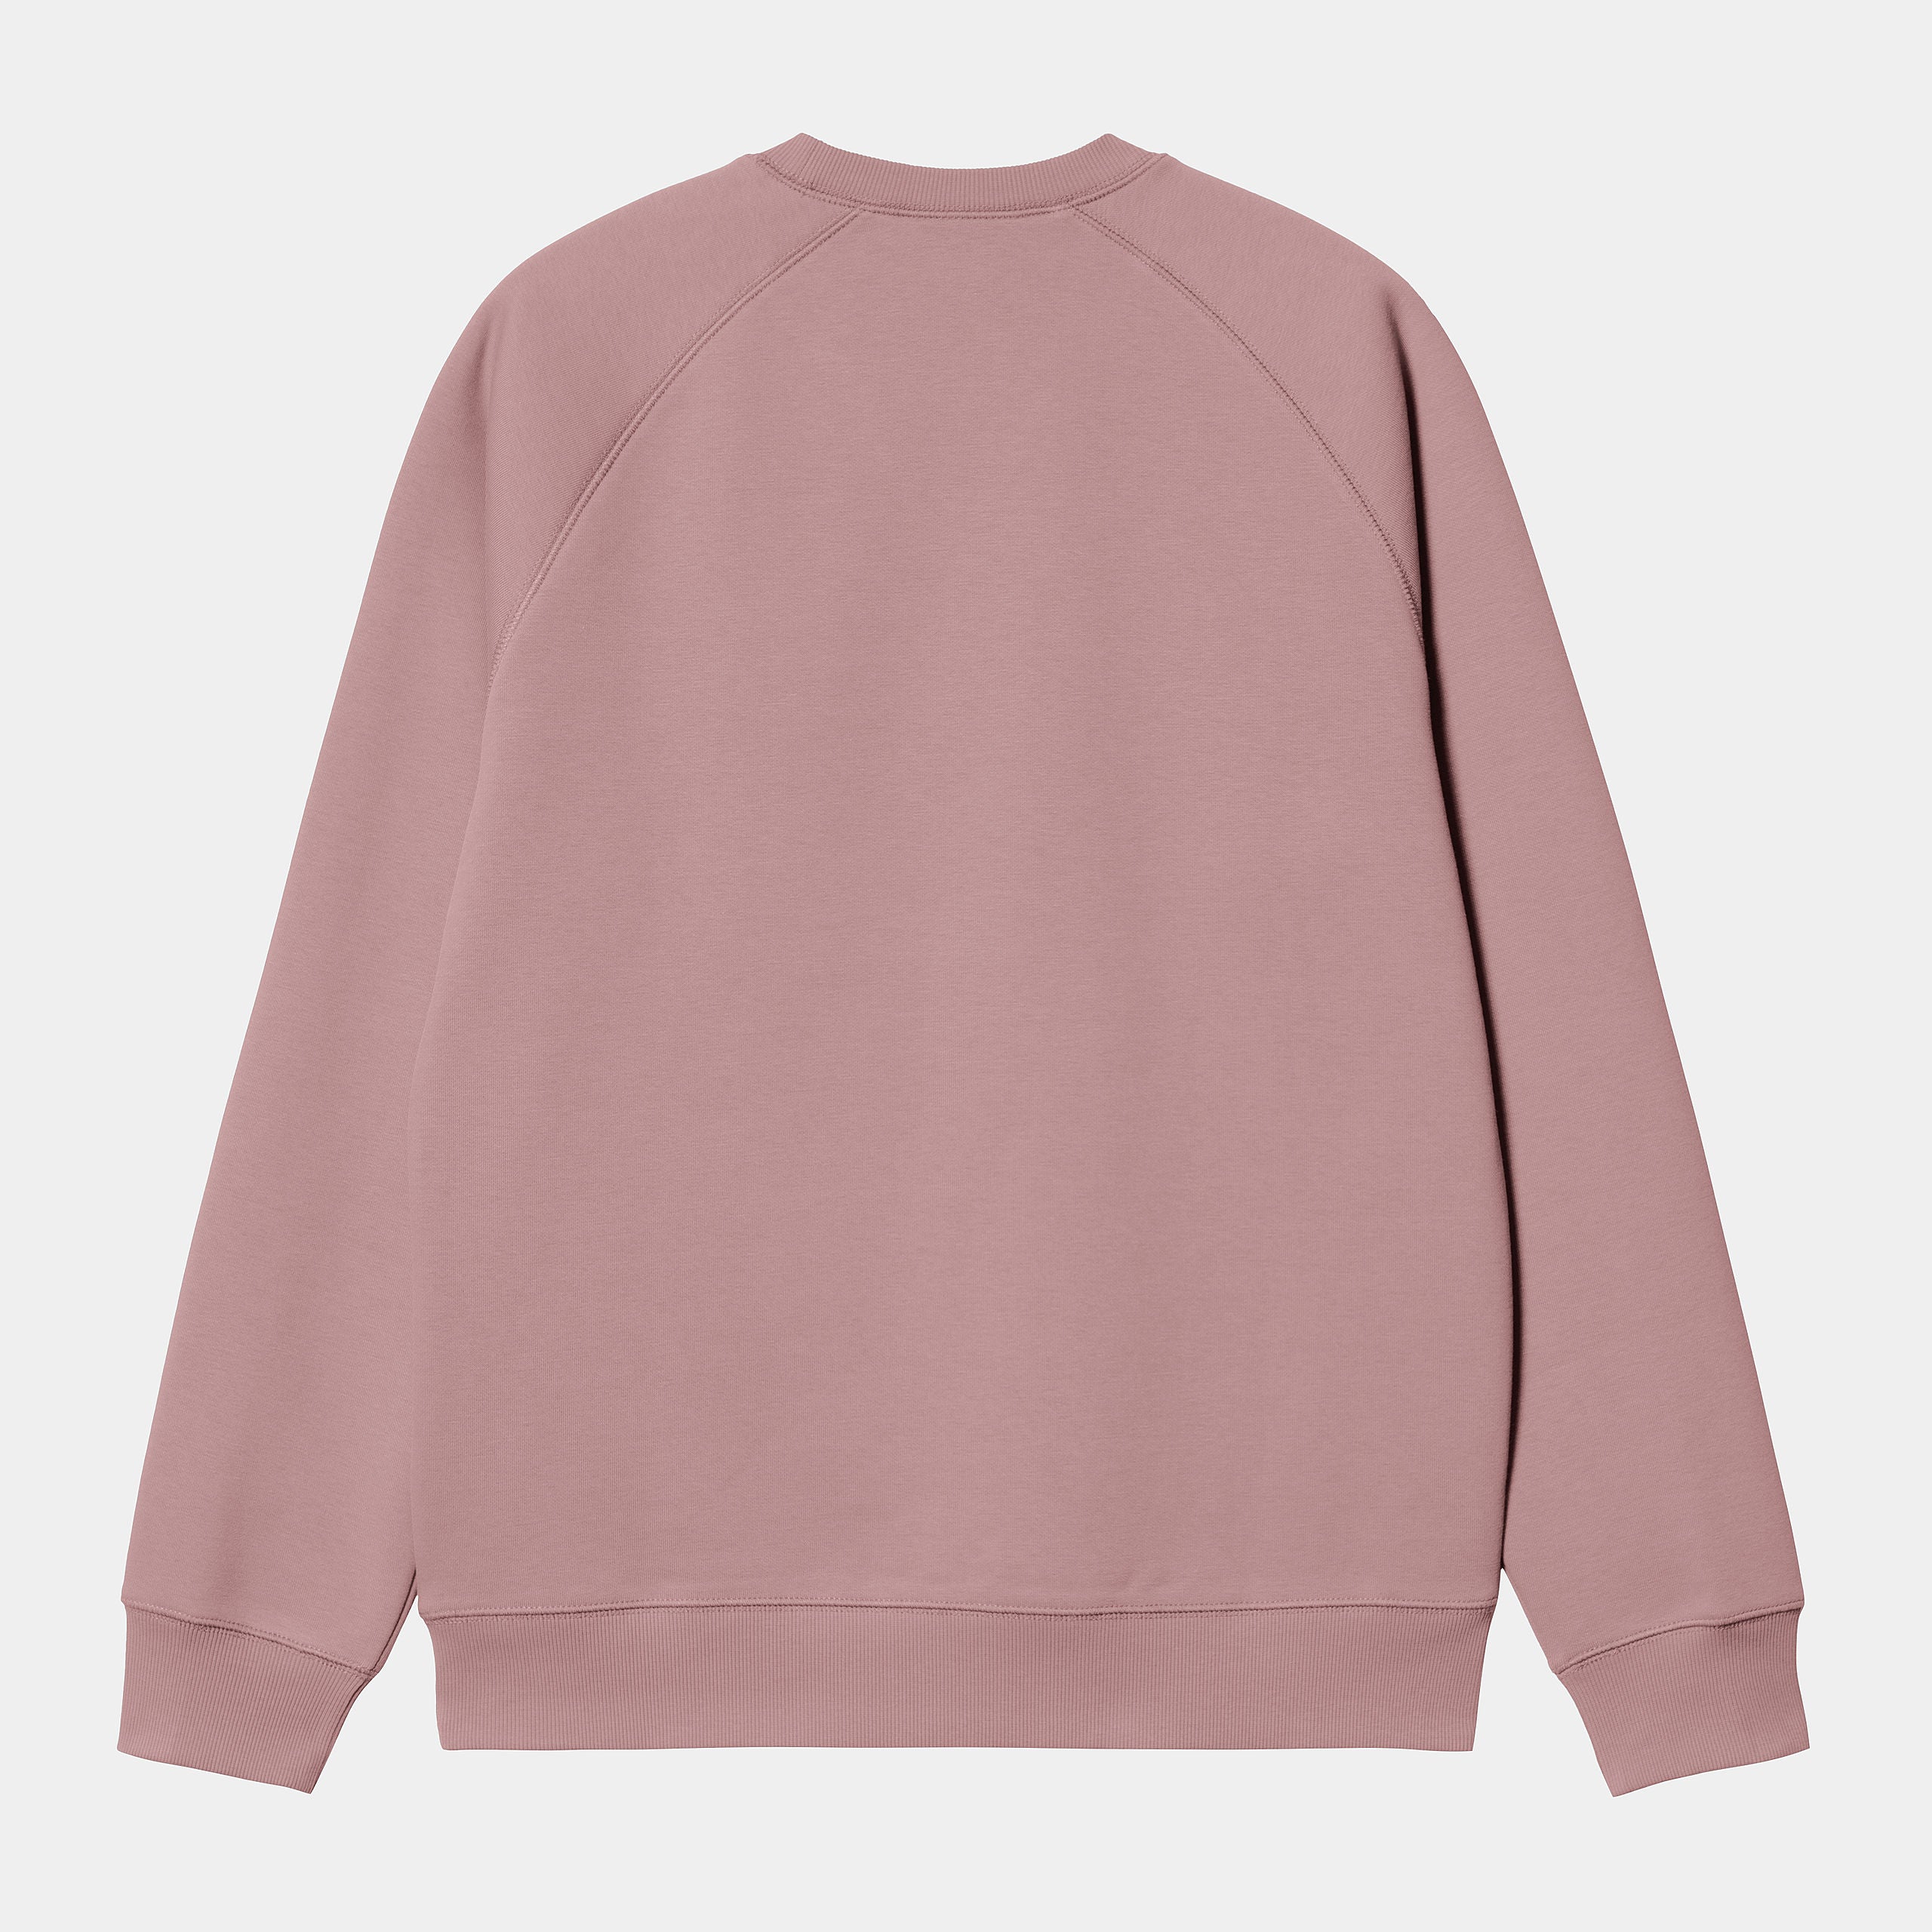 Carhartt WIP Mens Chase Sweat Top - Glassy Pink / Gold